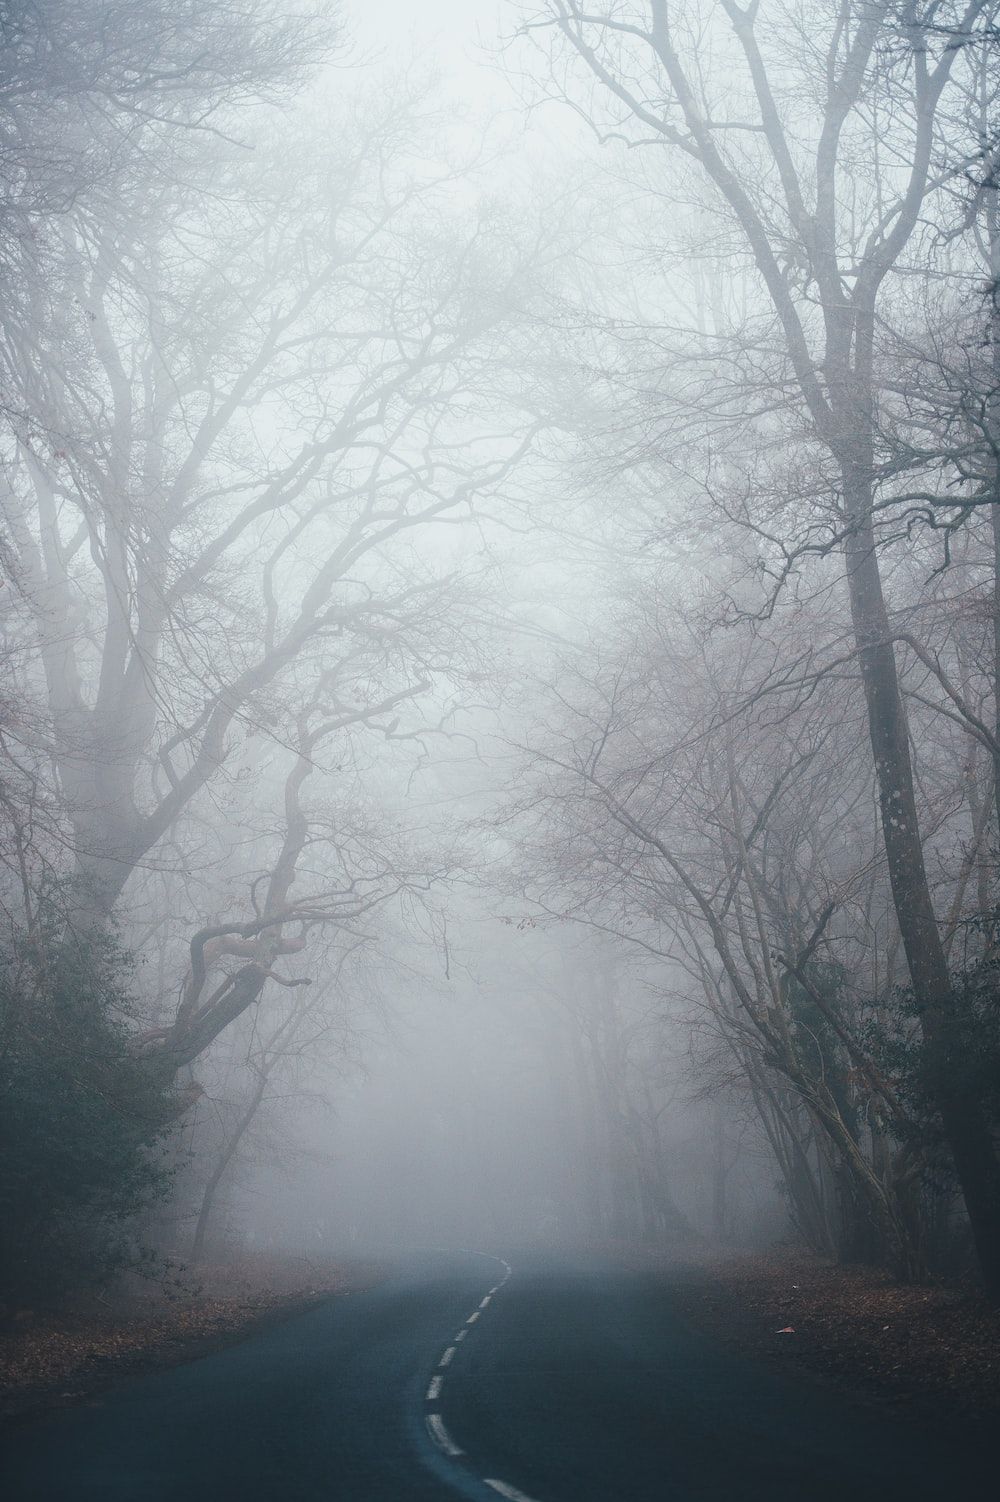 A foggy road with trees on both sides - Fog